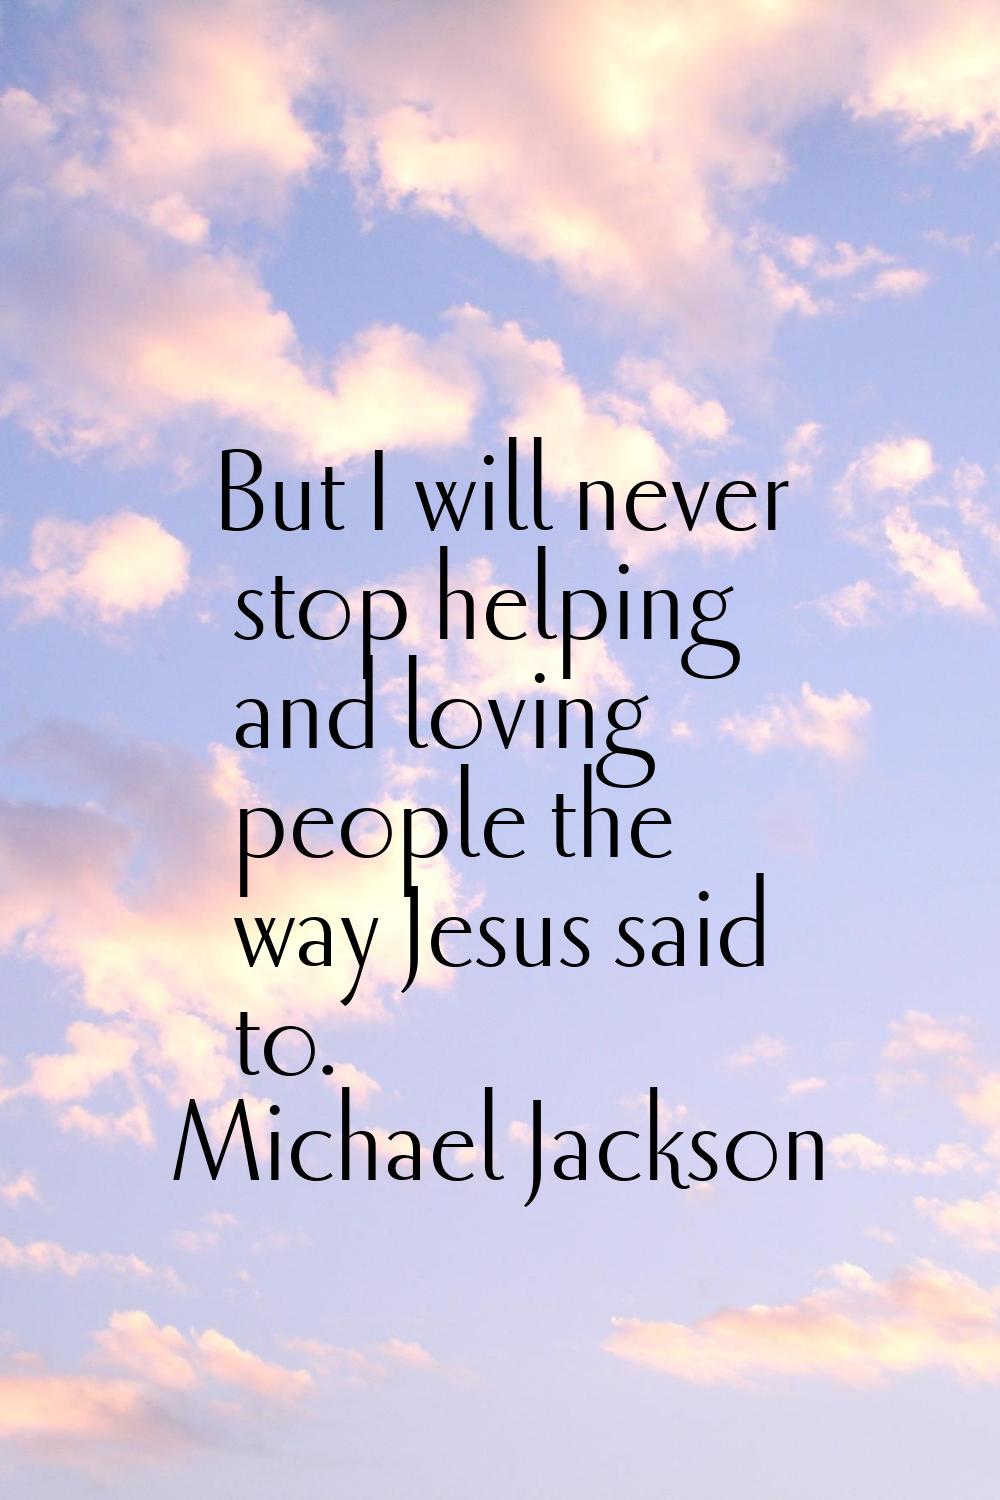 But I will never stop helping and loving people the way Jesus said to.